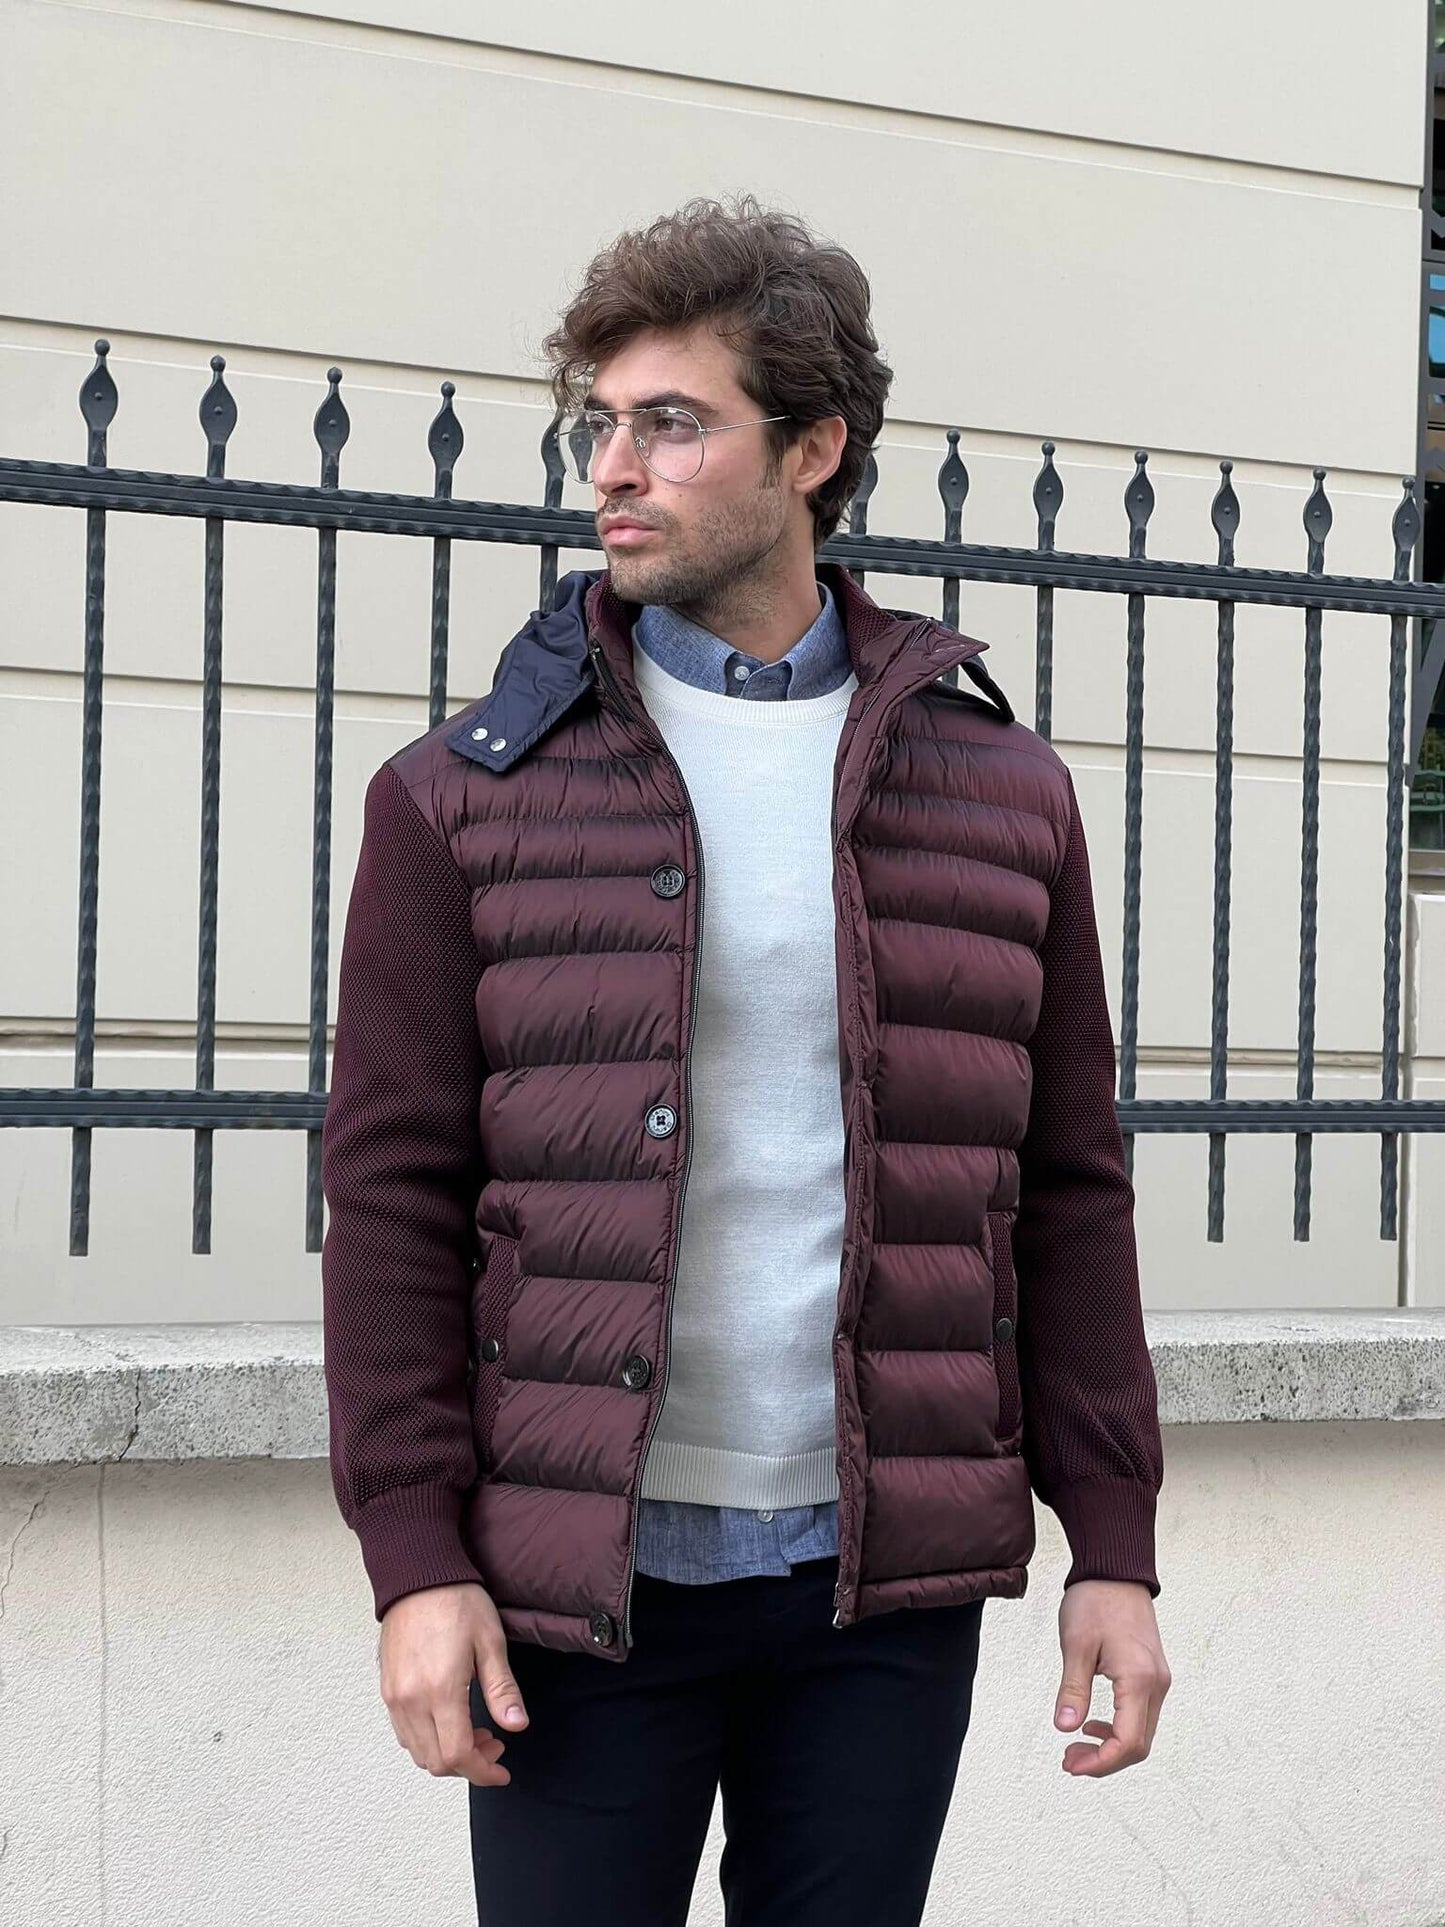 Chic and cozy: Our male model flaunts a knitted burgundy coat, a perfect blend of comfort and style.